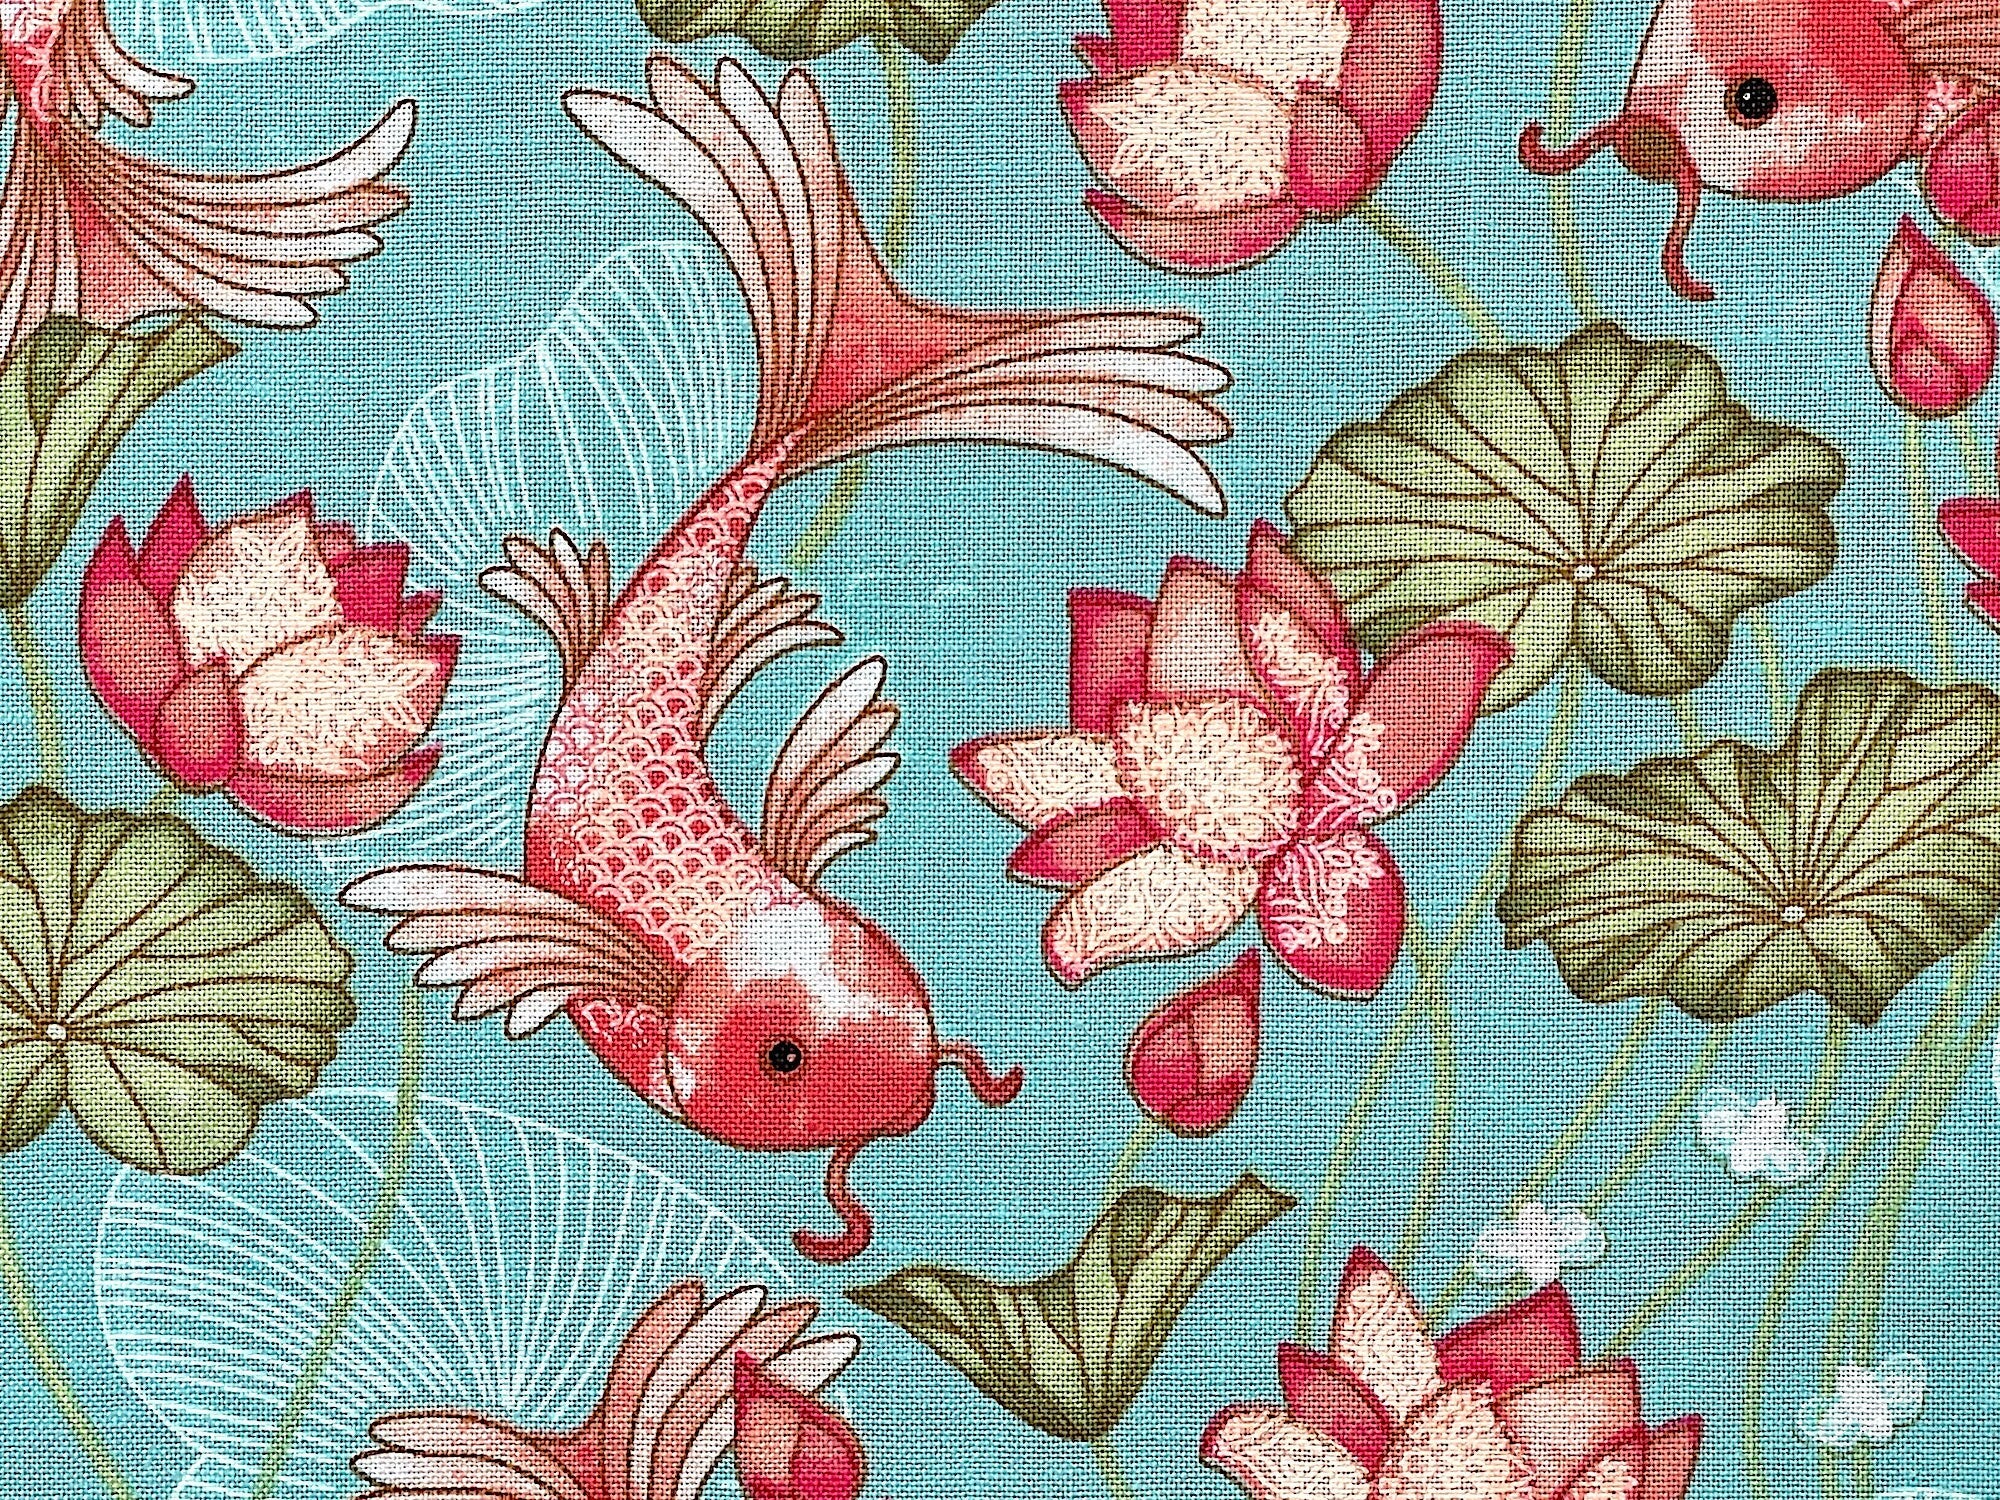 Close up of koi and water plants.